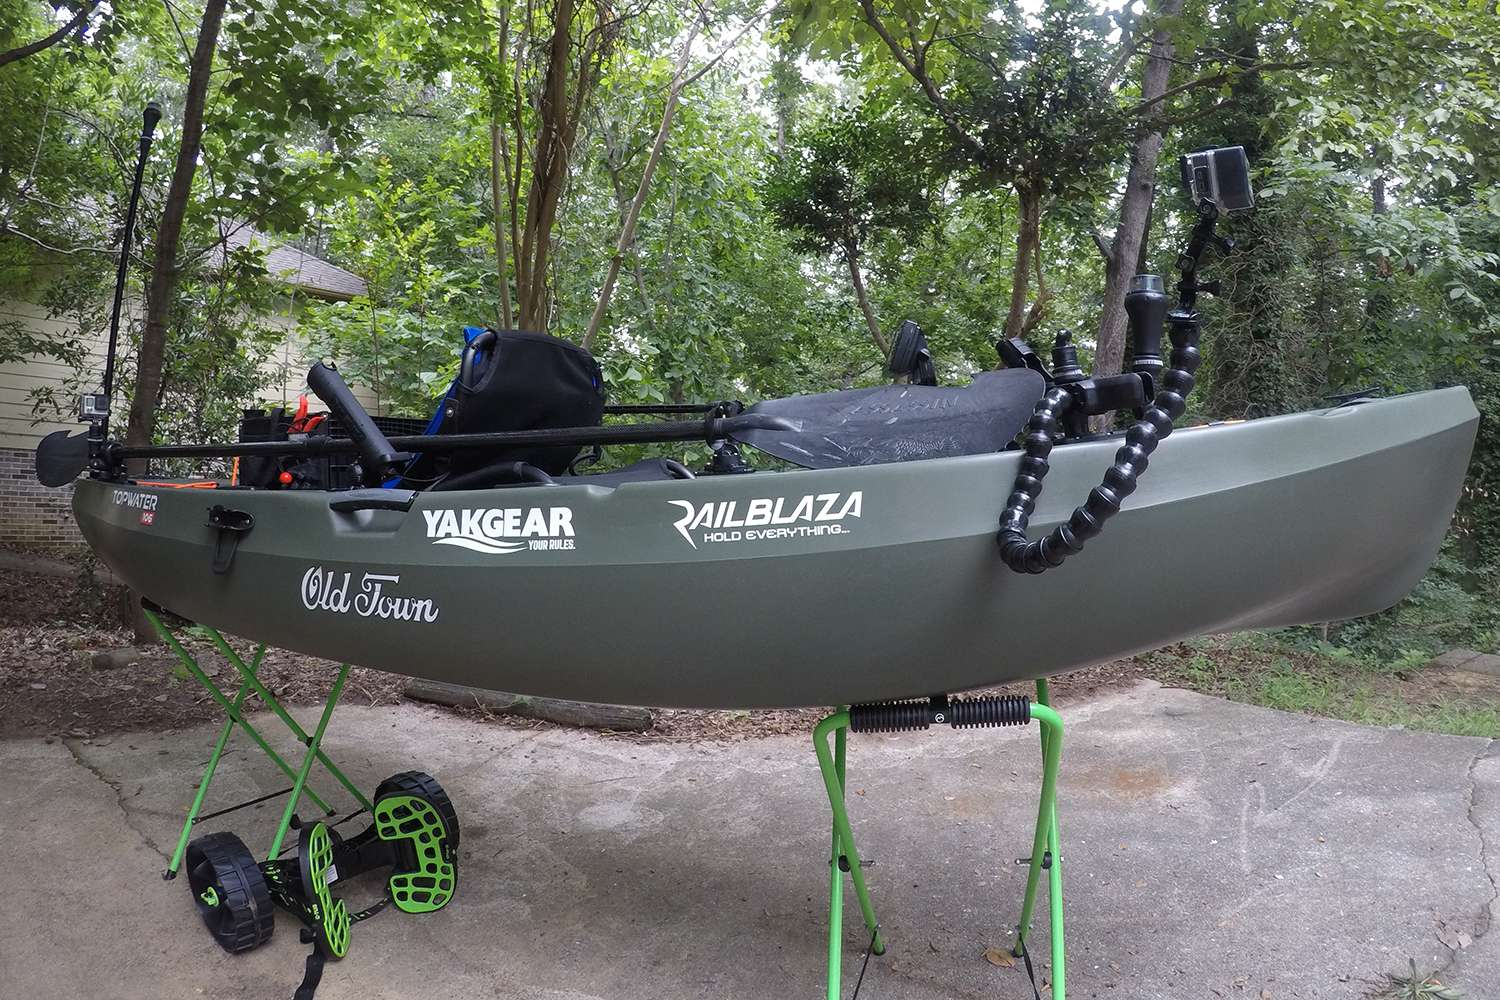 The compact yet comfortable Old Town Topwater 106 is a great fishing-kayak option once rigged up with a stack of YakGear accessories.